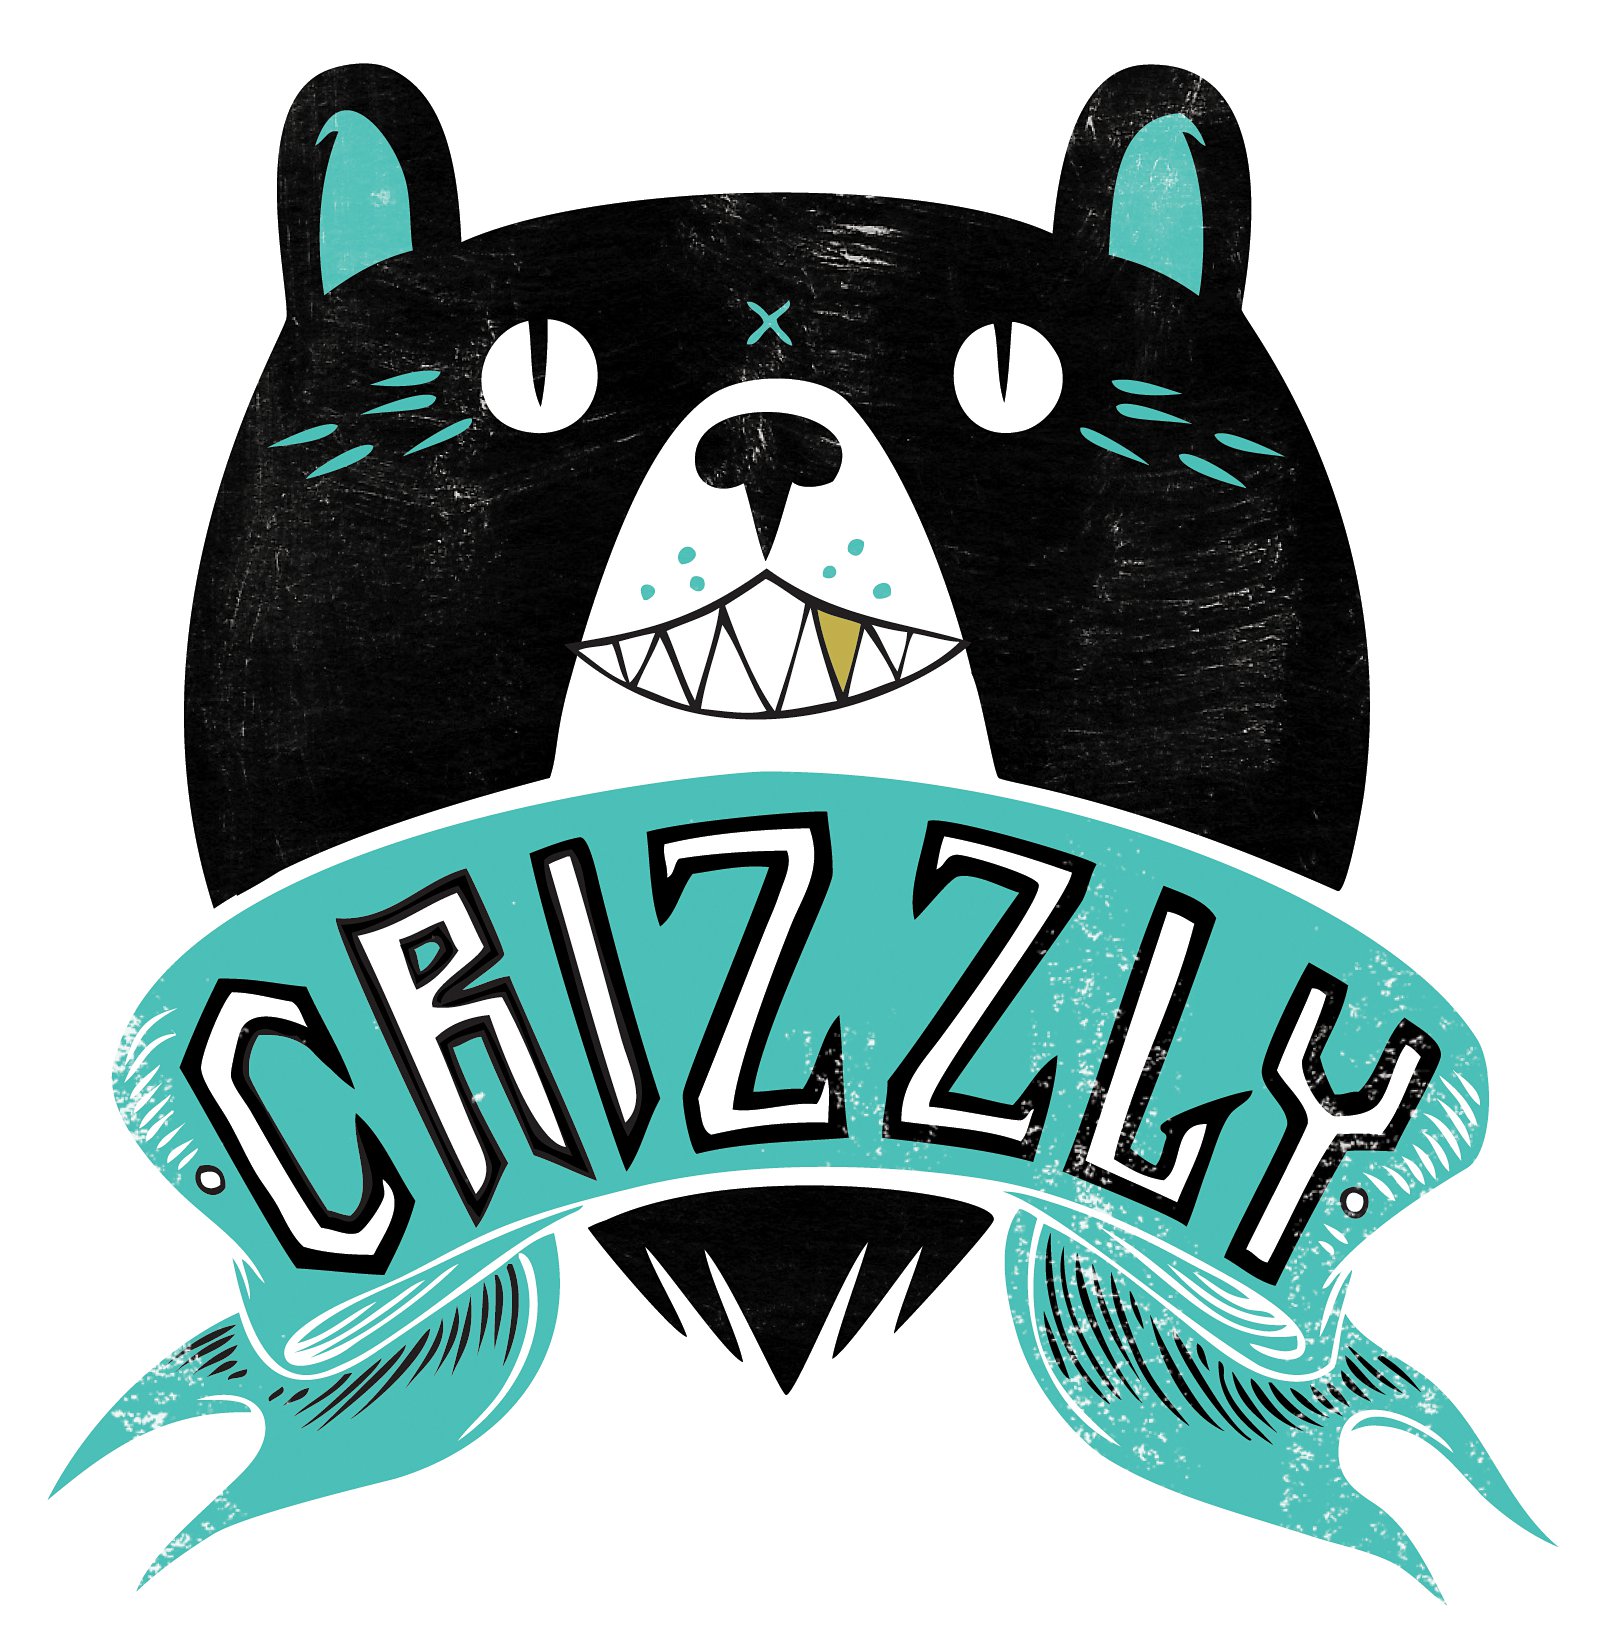 Crizzly Profile Link